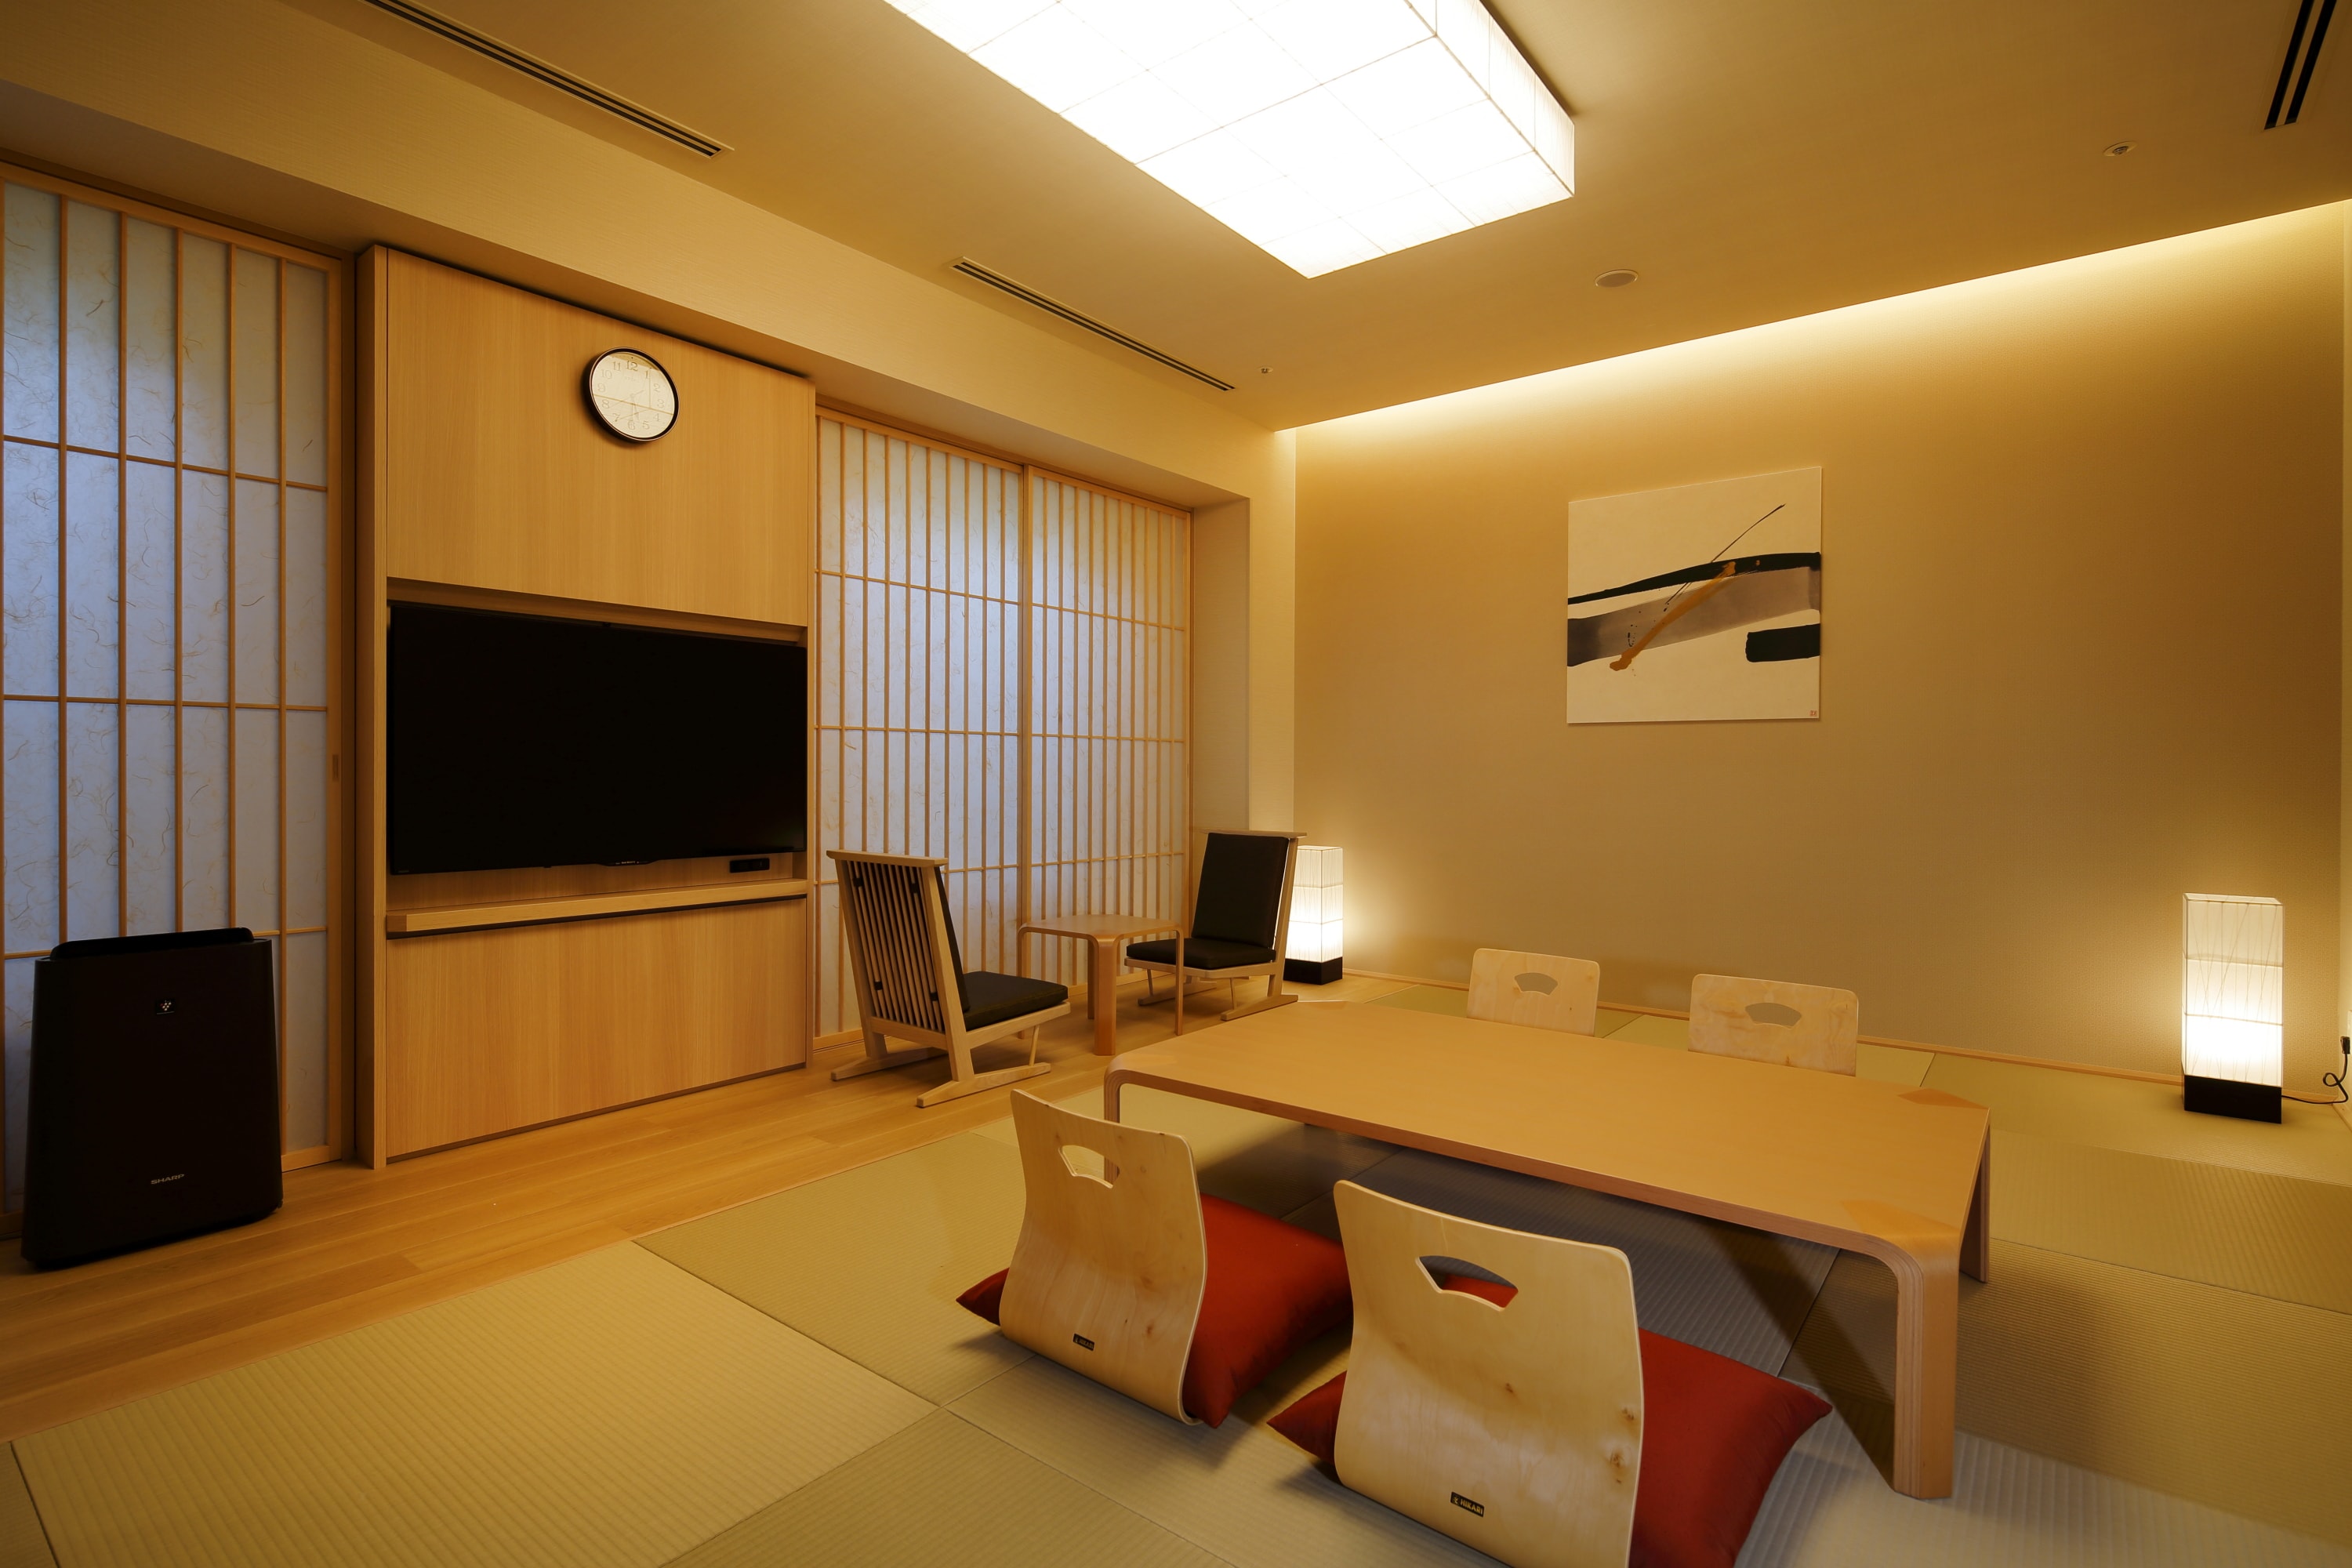 The hotel also has a Japanese-style room. You can relax with a futon.